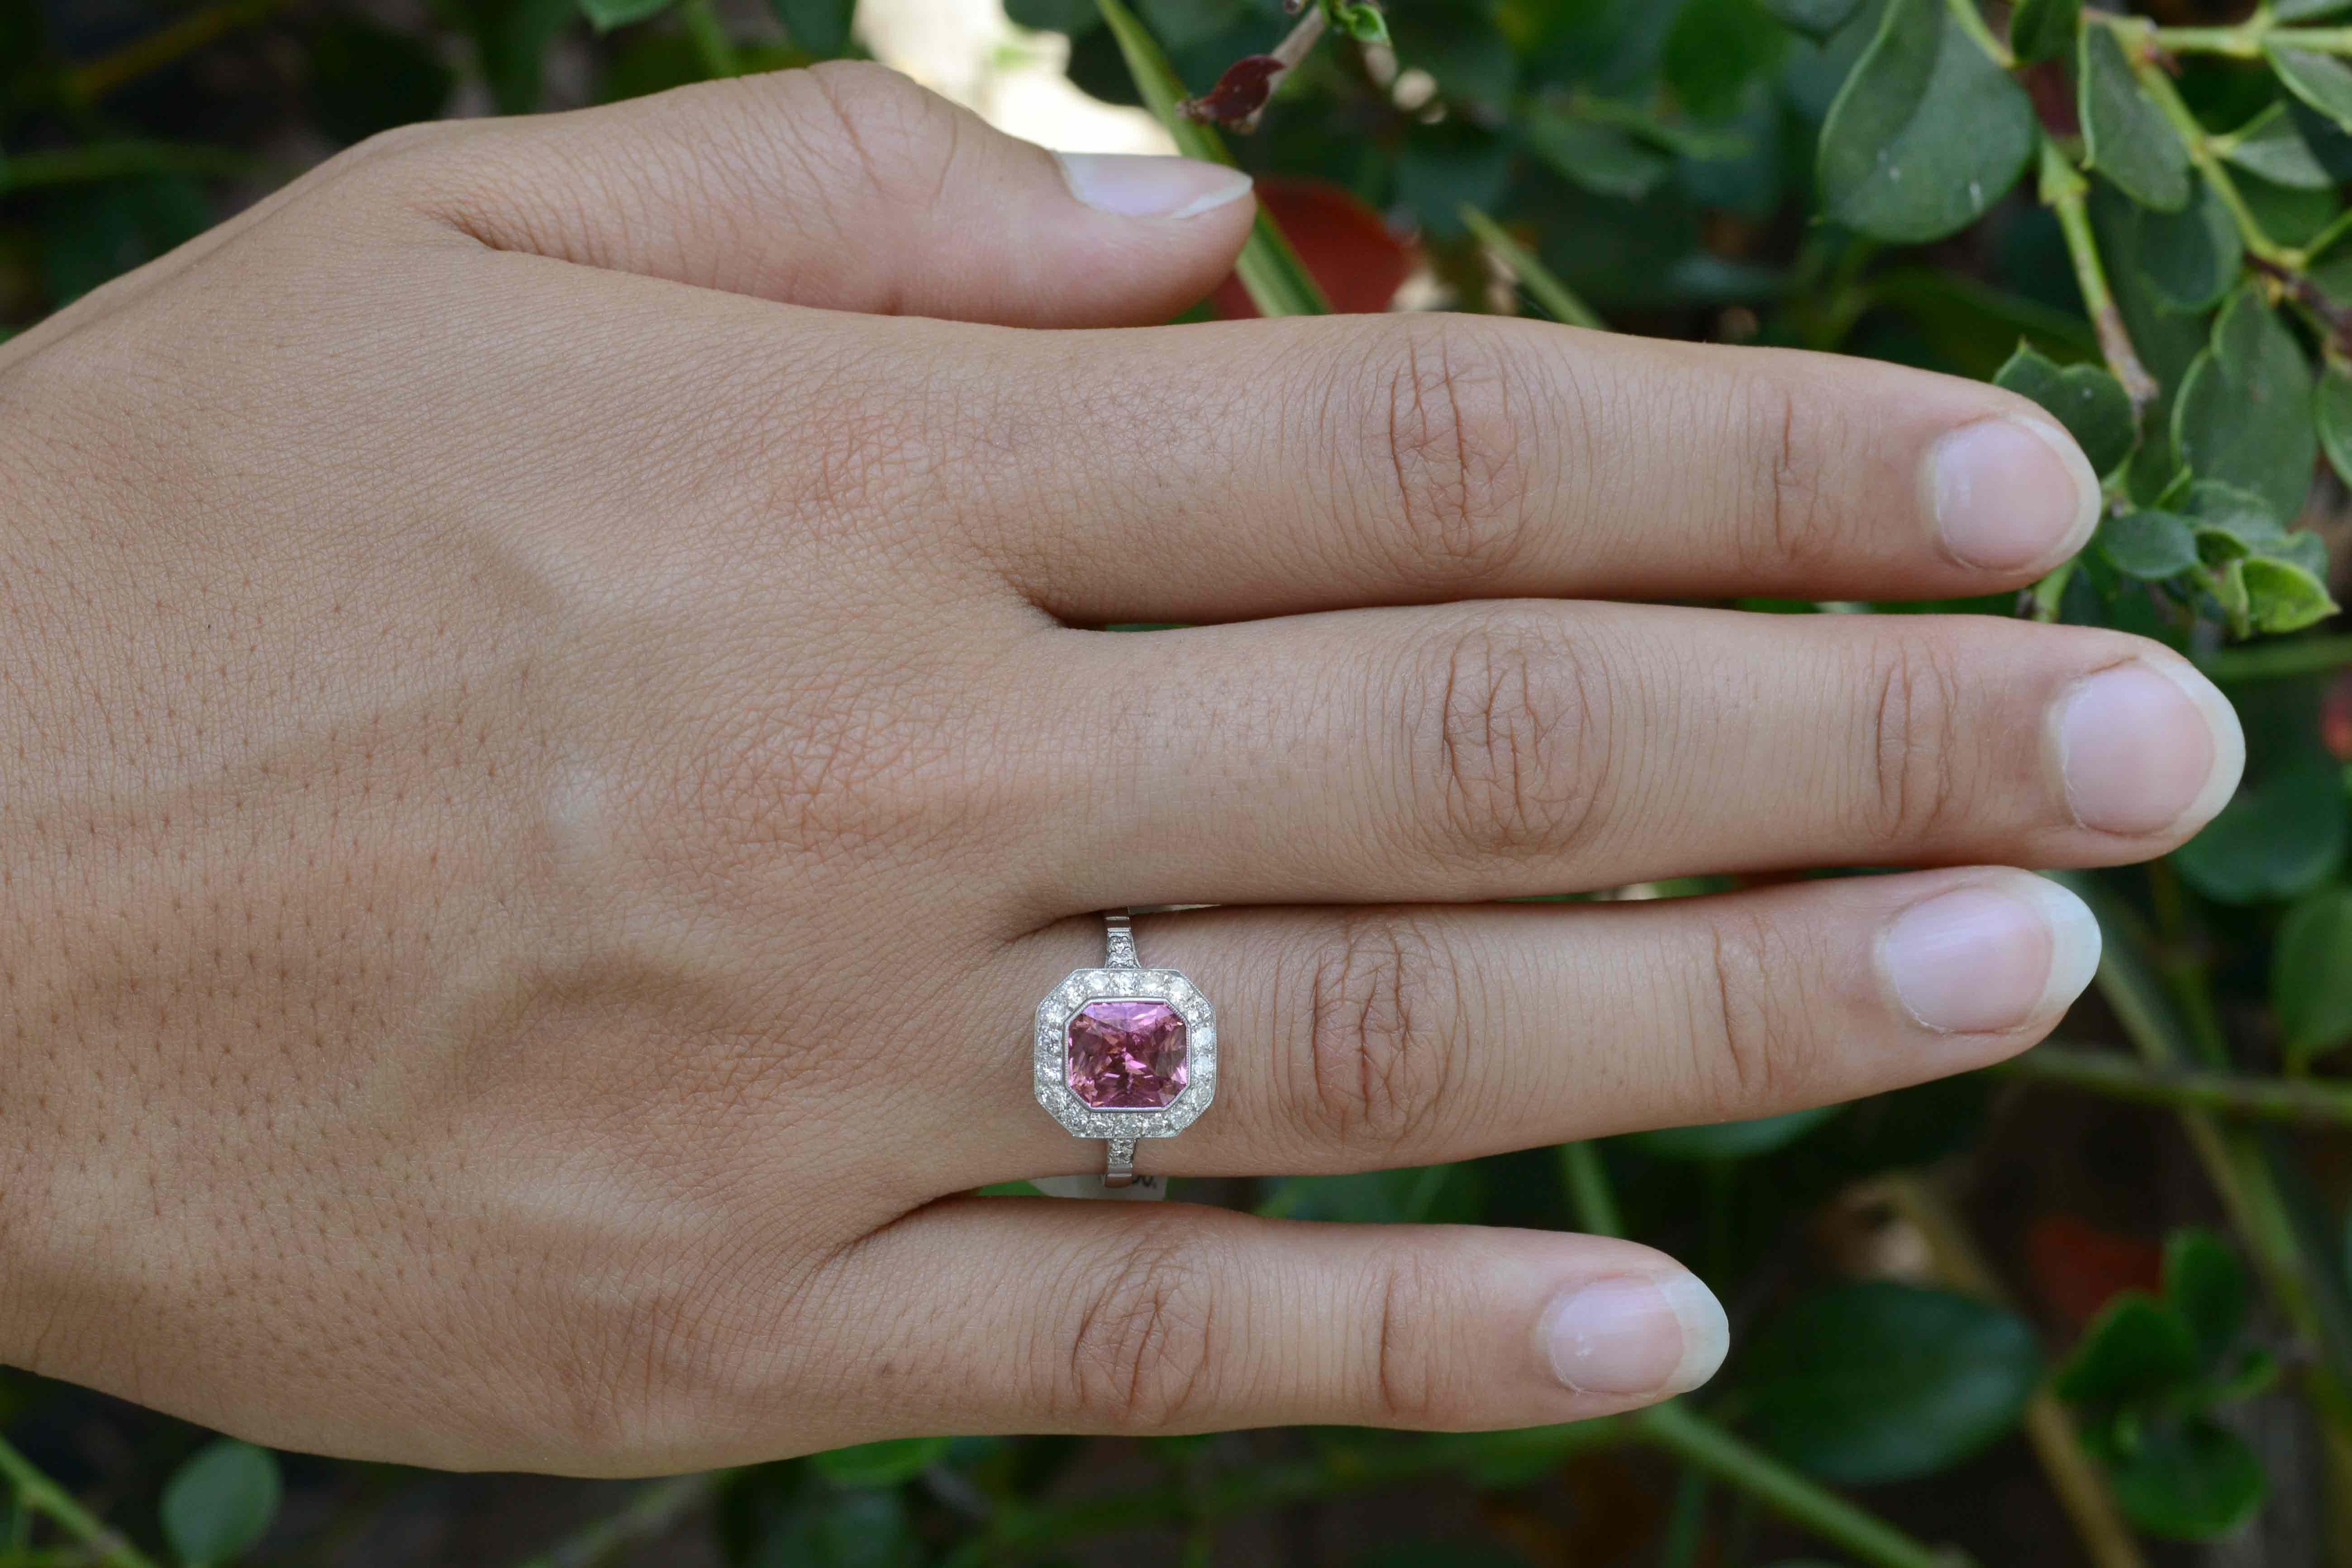 The incredible hot pink of this natural sapphire is almost overwhelming....almost. The Art Deco inspired platinum halo is lined with dazzling round diamonds and framed in feminine milgrain. The sleek, octagon silhouette features a low, bezel setting